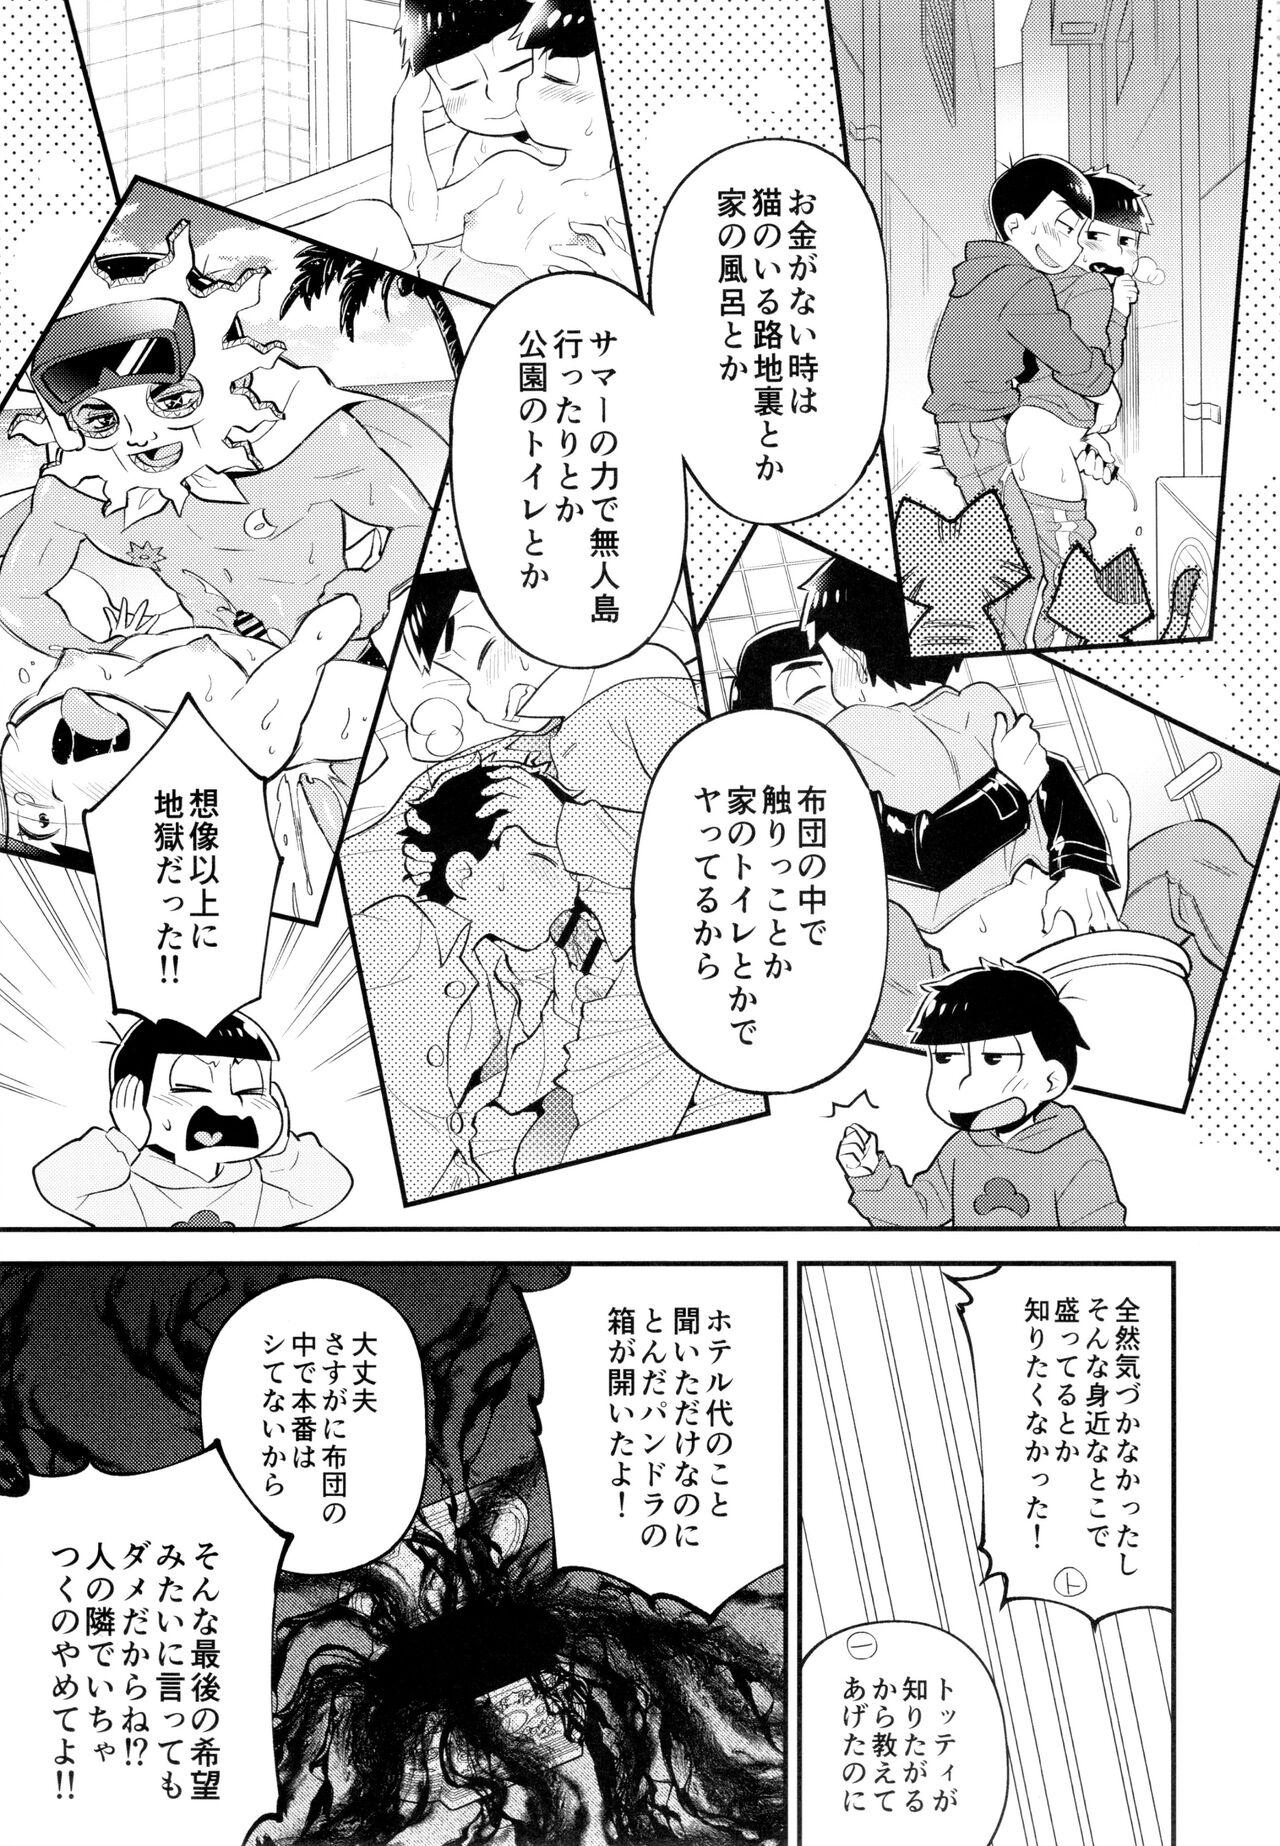 Chica Our Six-Day Sexual War - Osomatsu-san Hoe - Page 6